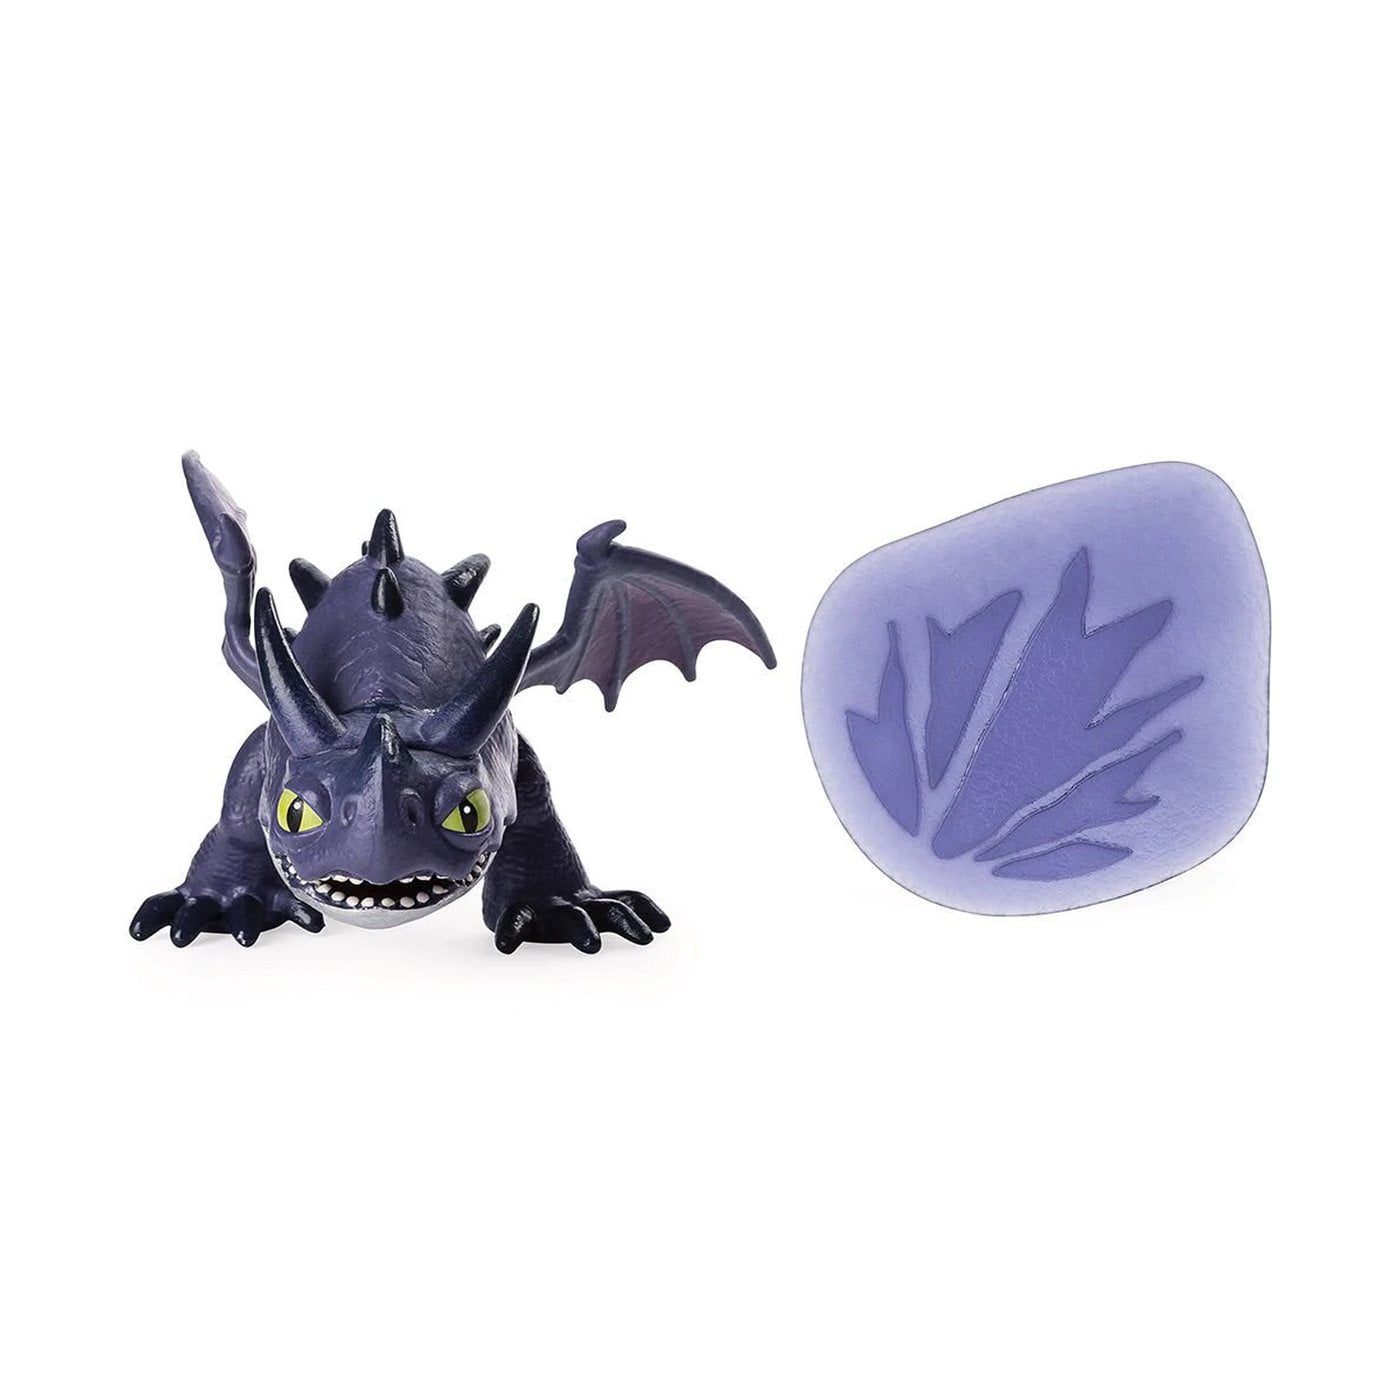 HOW TO TRAIN YOUR DRAGON LEGENDS EVOLVED TOOTHLESS & RUMBLING GUTBUSTER MINI FIG